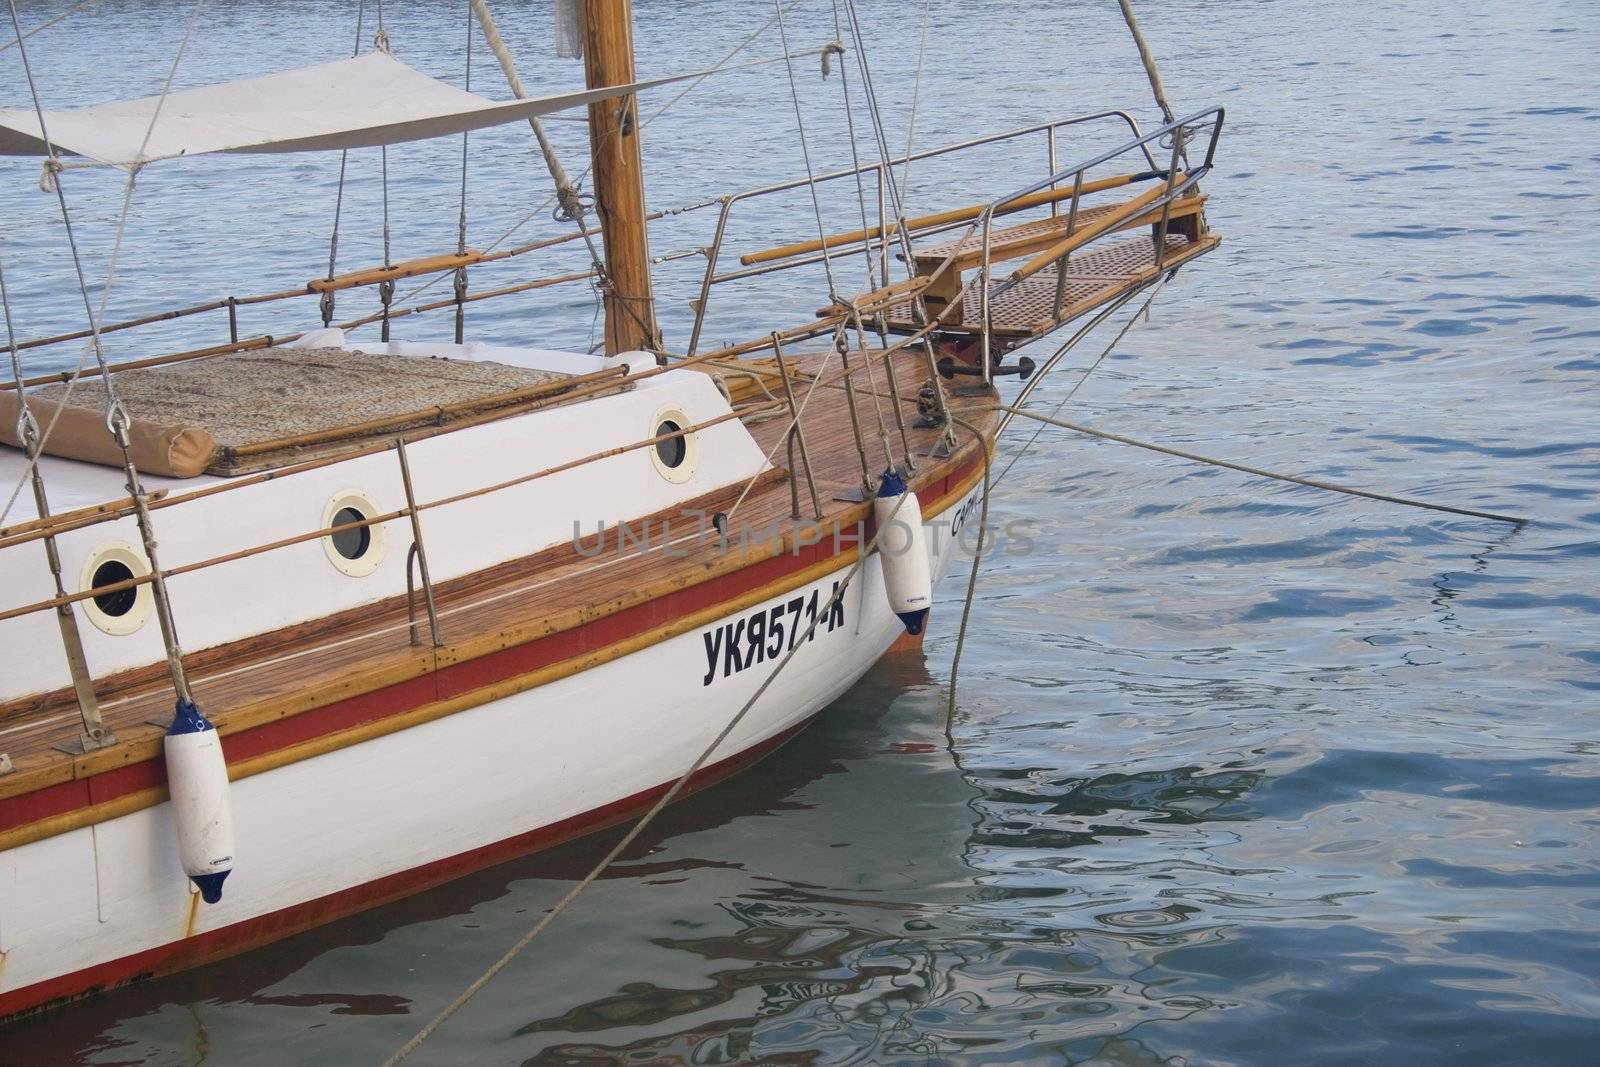 Close-up of a wooden sailboat docked in a harbor